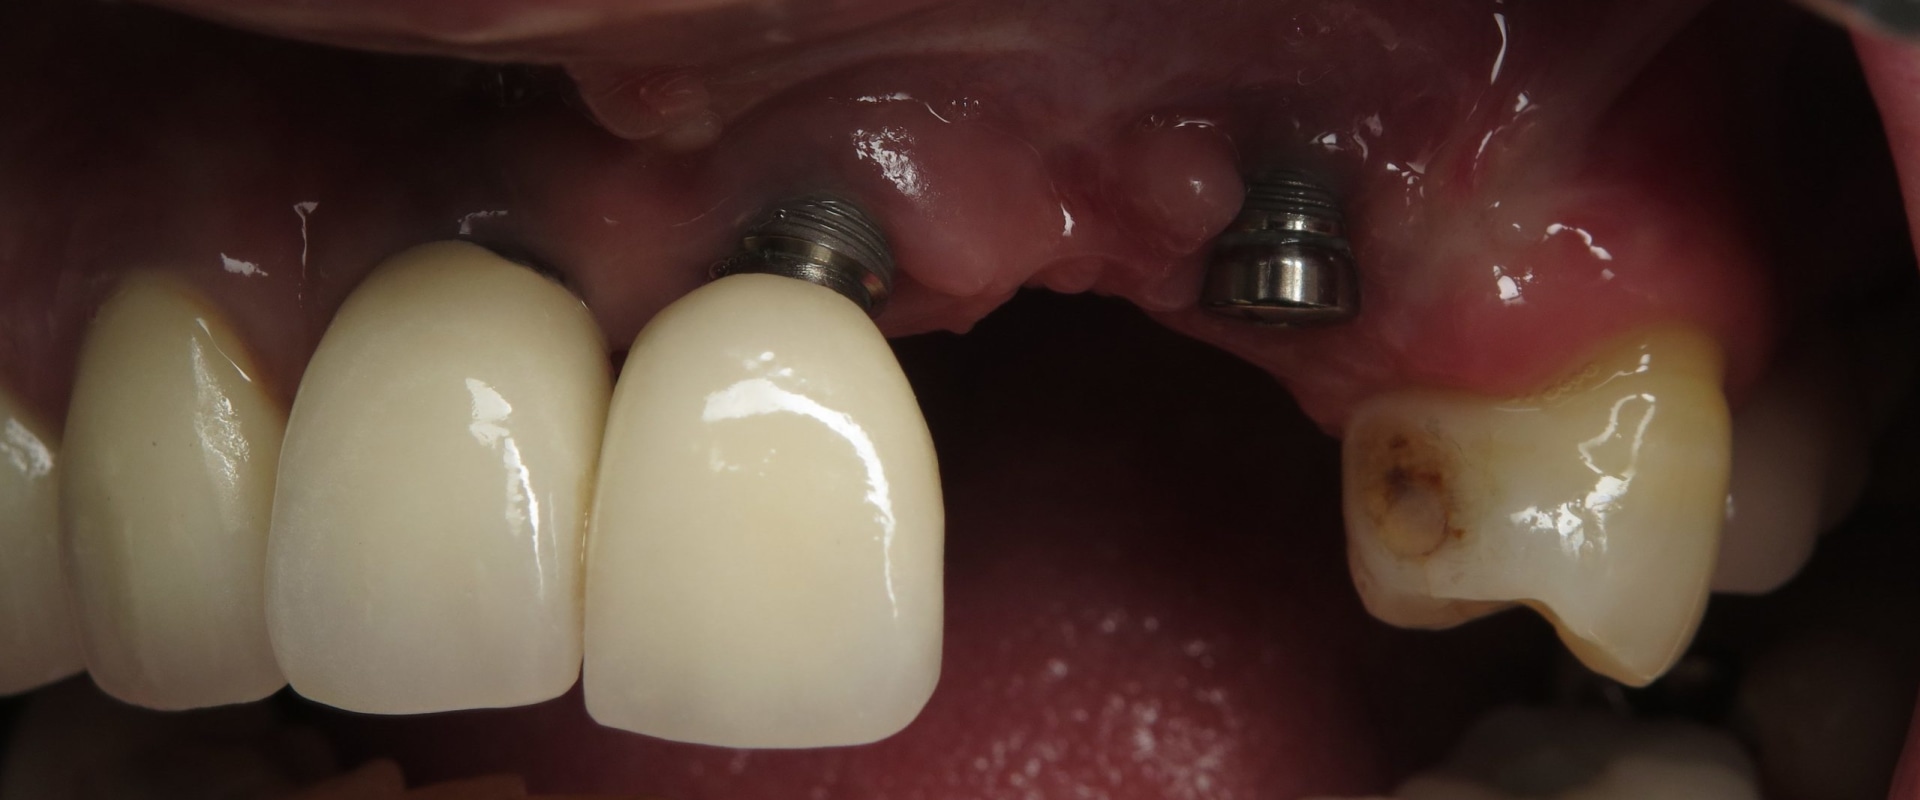 Can a failed tooth implant be replaced?